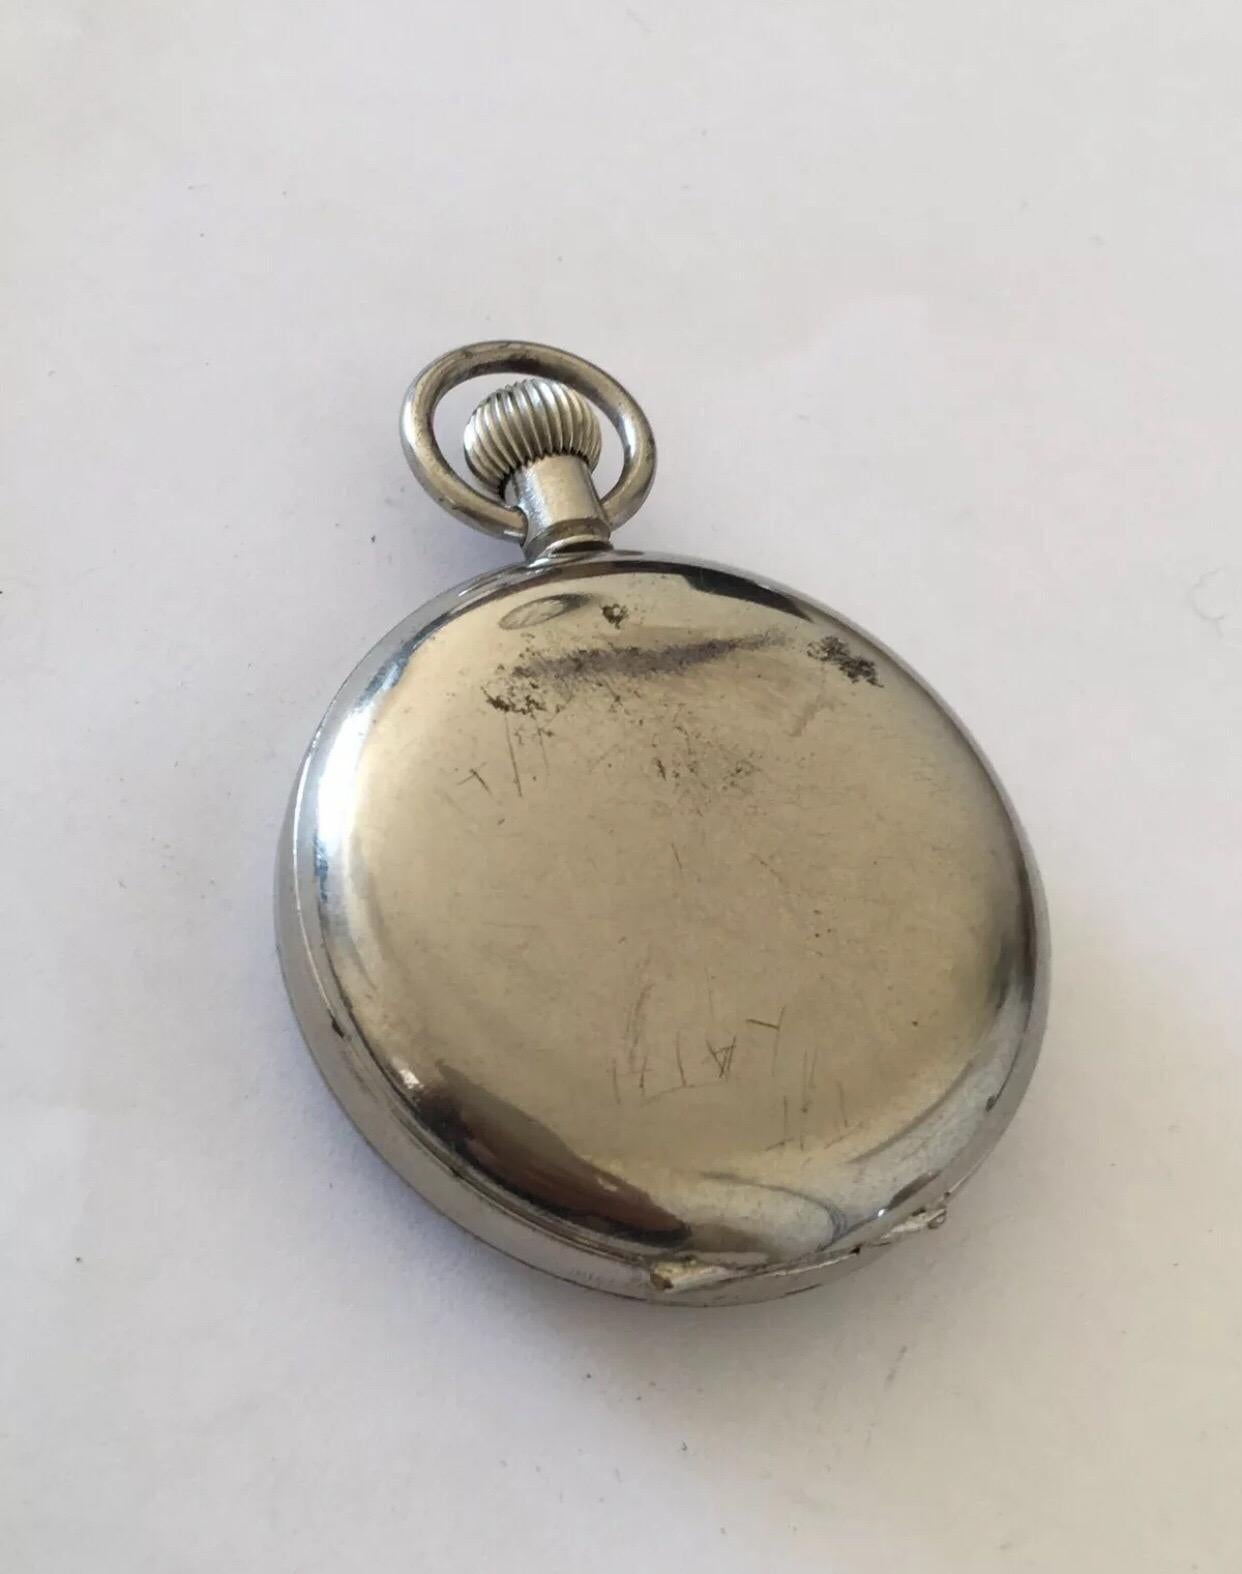 Antique Swiss Made With Visible Escapement Silver Plated Pocket Watch.
This beautiful 49mm diameter visible escapement keyless silver plated pocket watch is in good working condition and it is running well. Visible signs of ageing and wear with